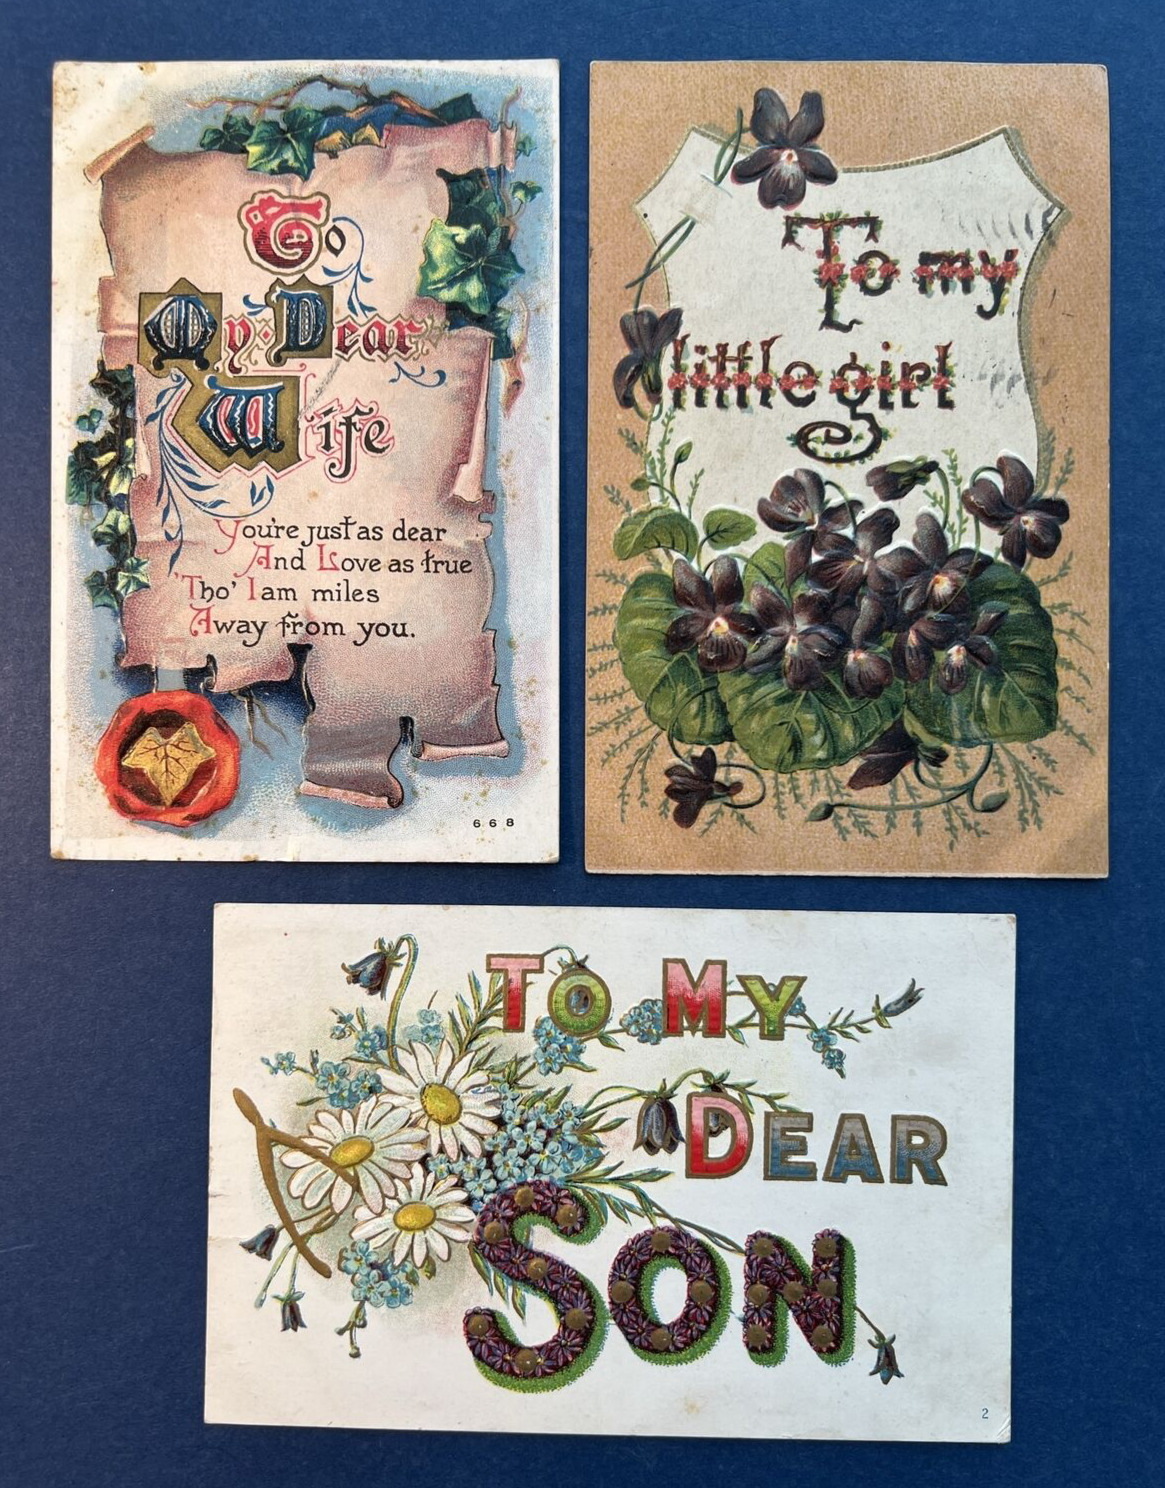 3 Family Greetings Antique Postcards. EMB, Gold. Wife, Son, Little Girl. Flowers